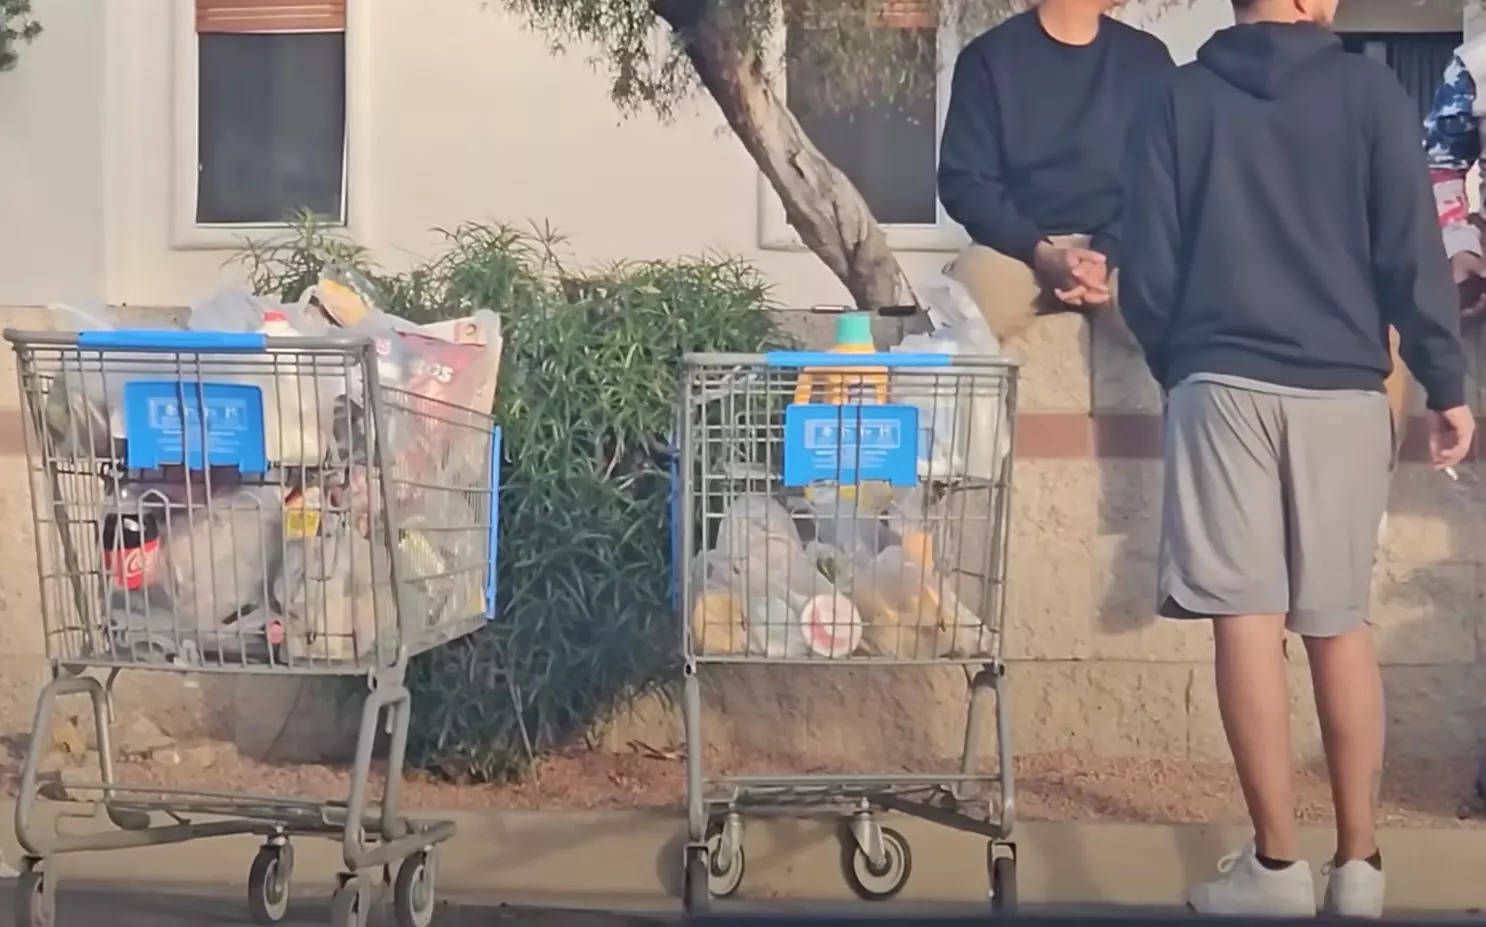 Shopping carts full of groceries in a Walmart parking lot.